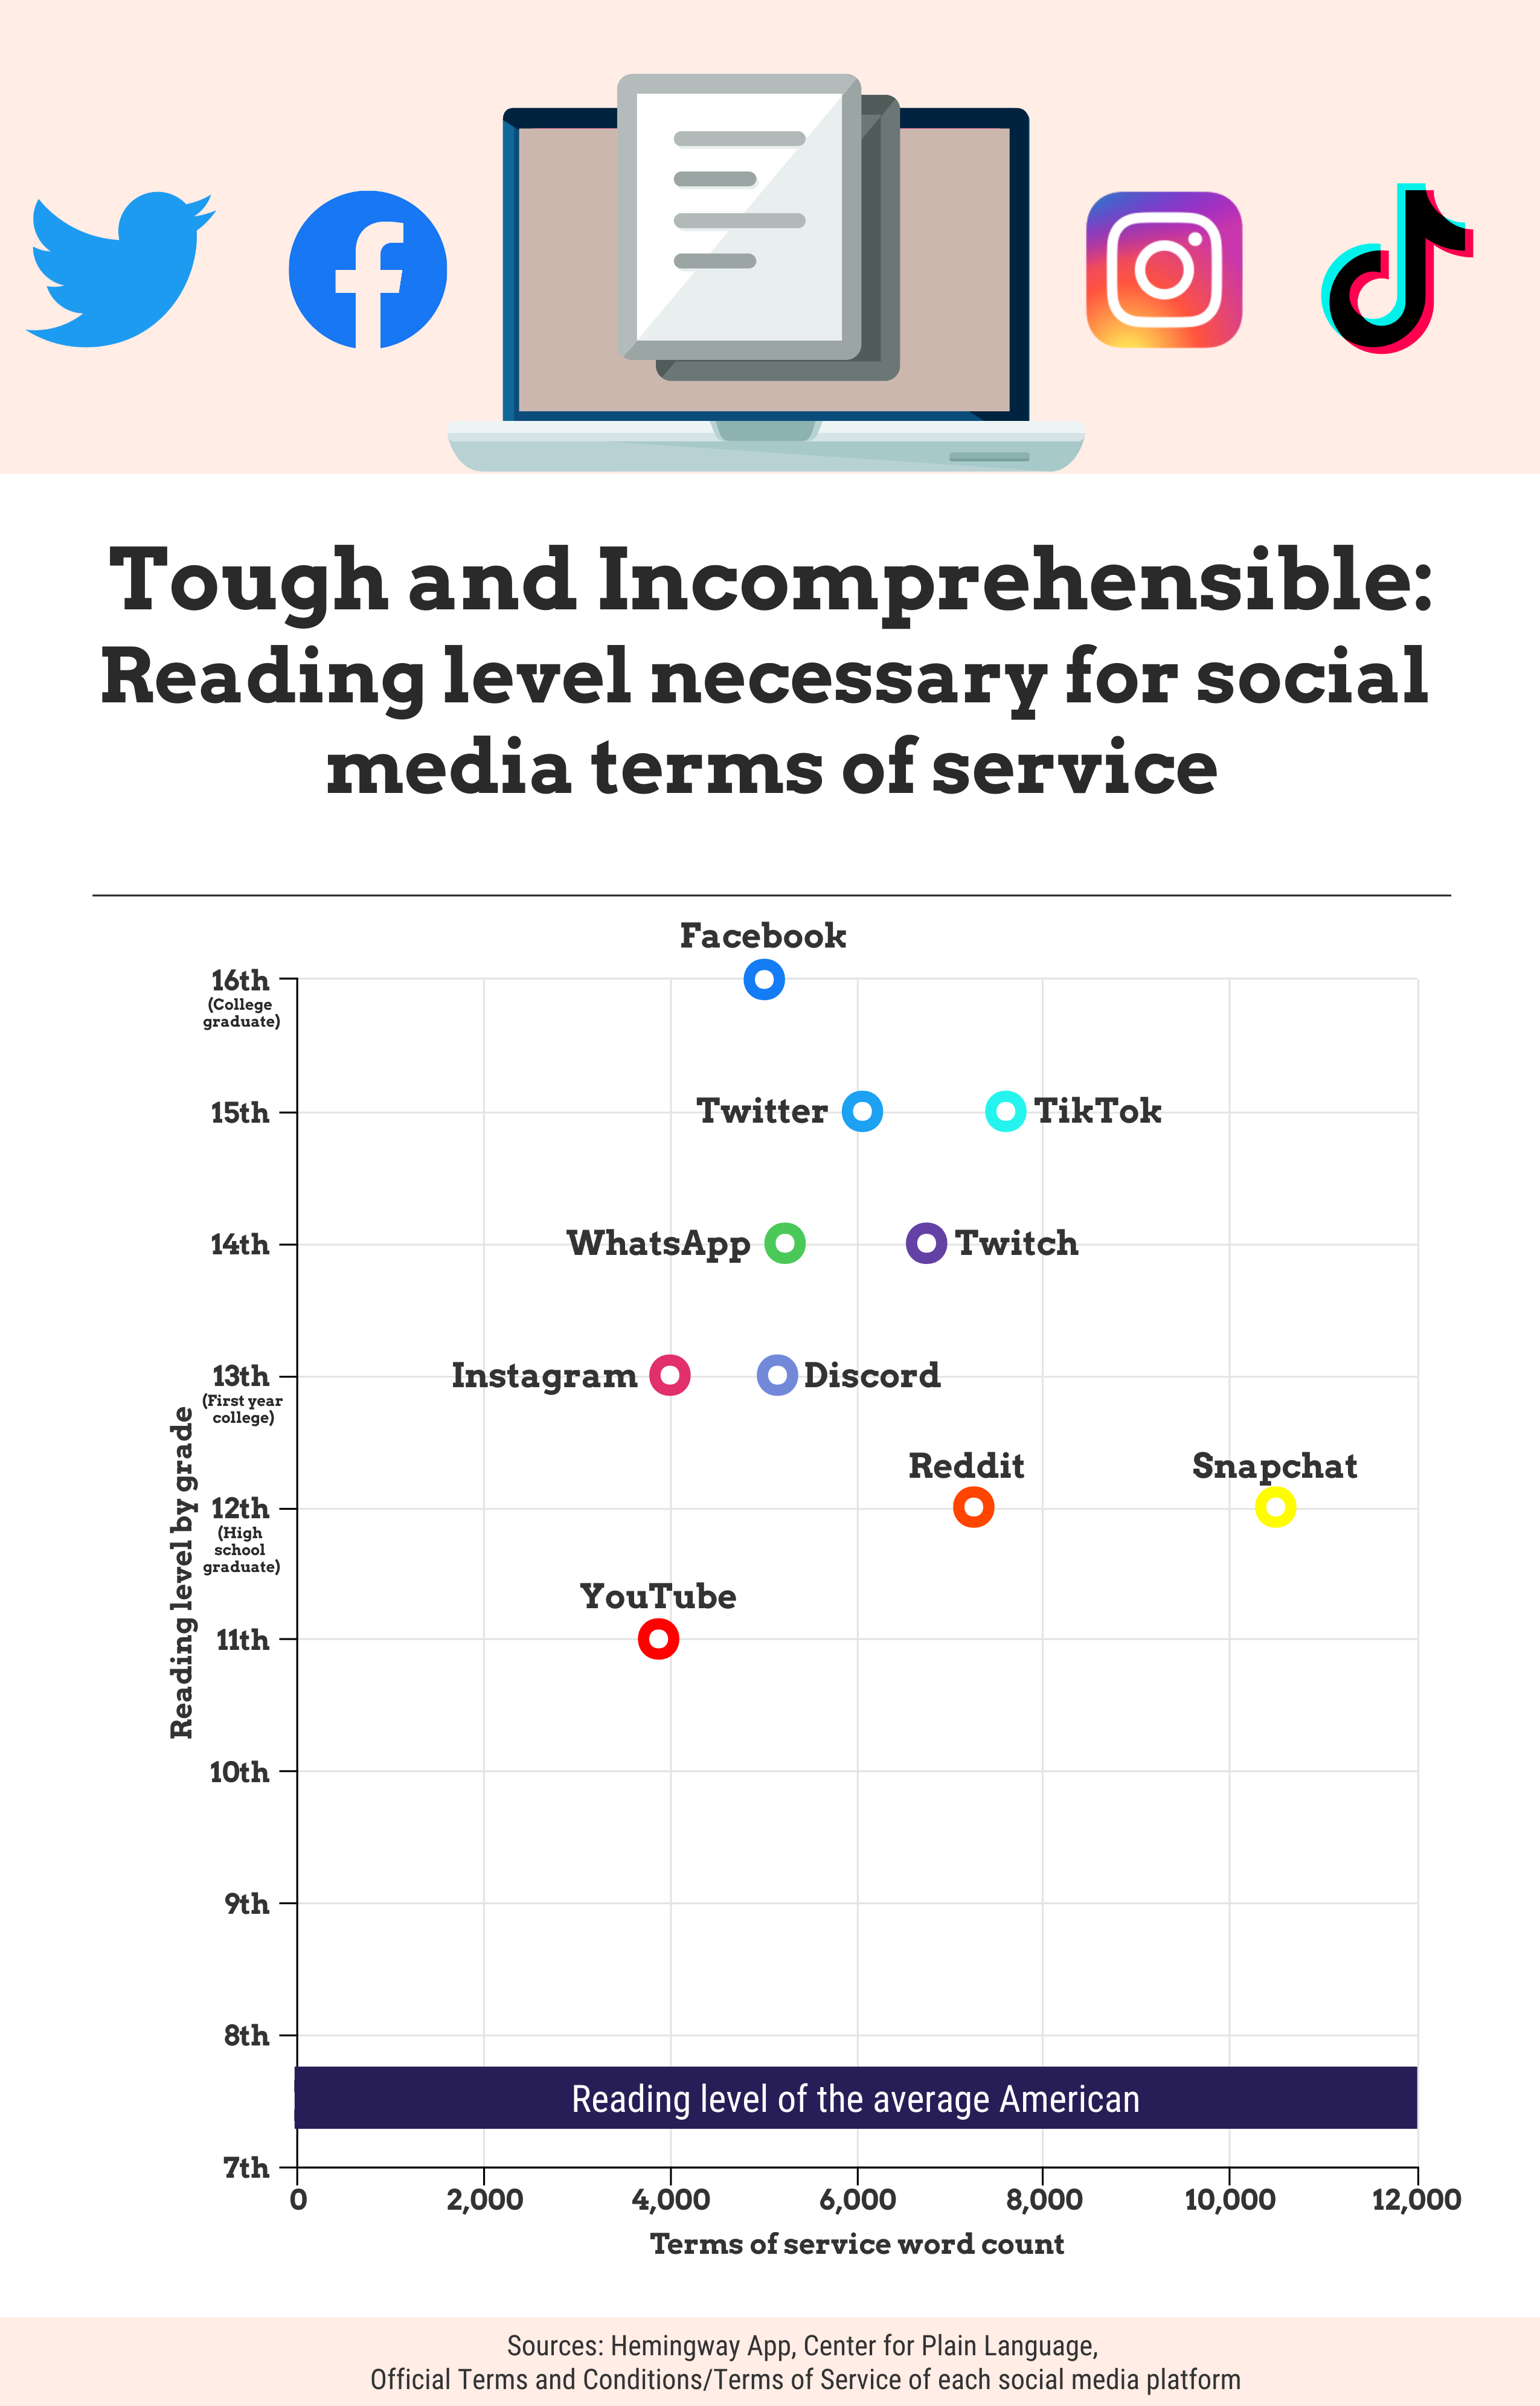 A graph titled "Tough and Incomprehensible: Reading level necessary for social media terms of service" that shows the reading level required for 10 different social media sites, including Facebook, TikTok, WhatsApp, and Reddit.